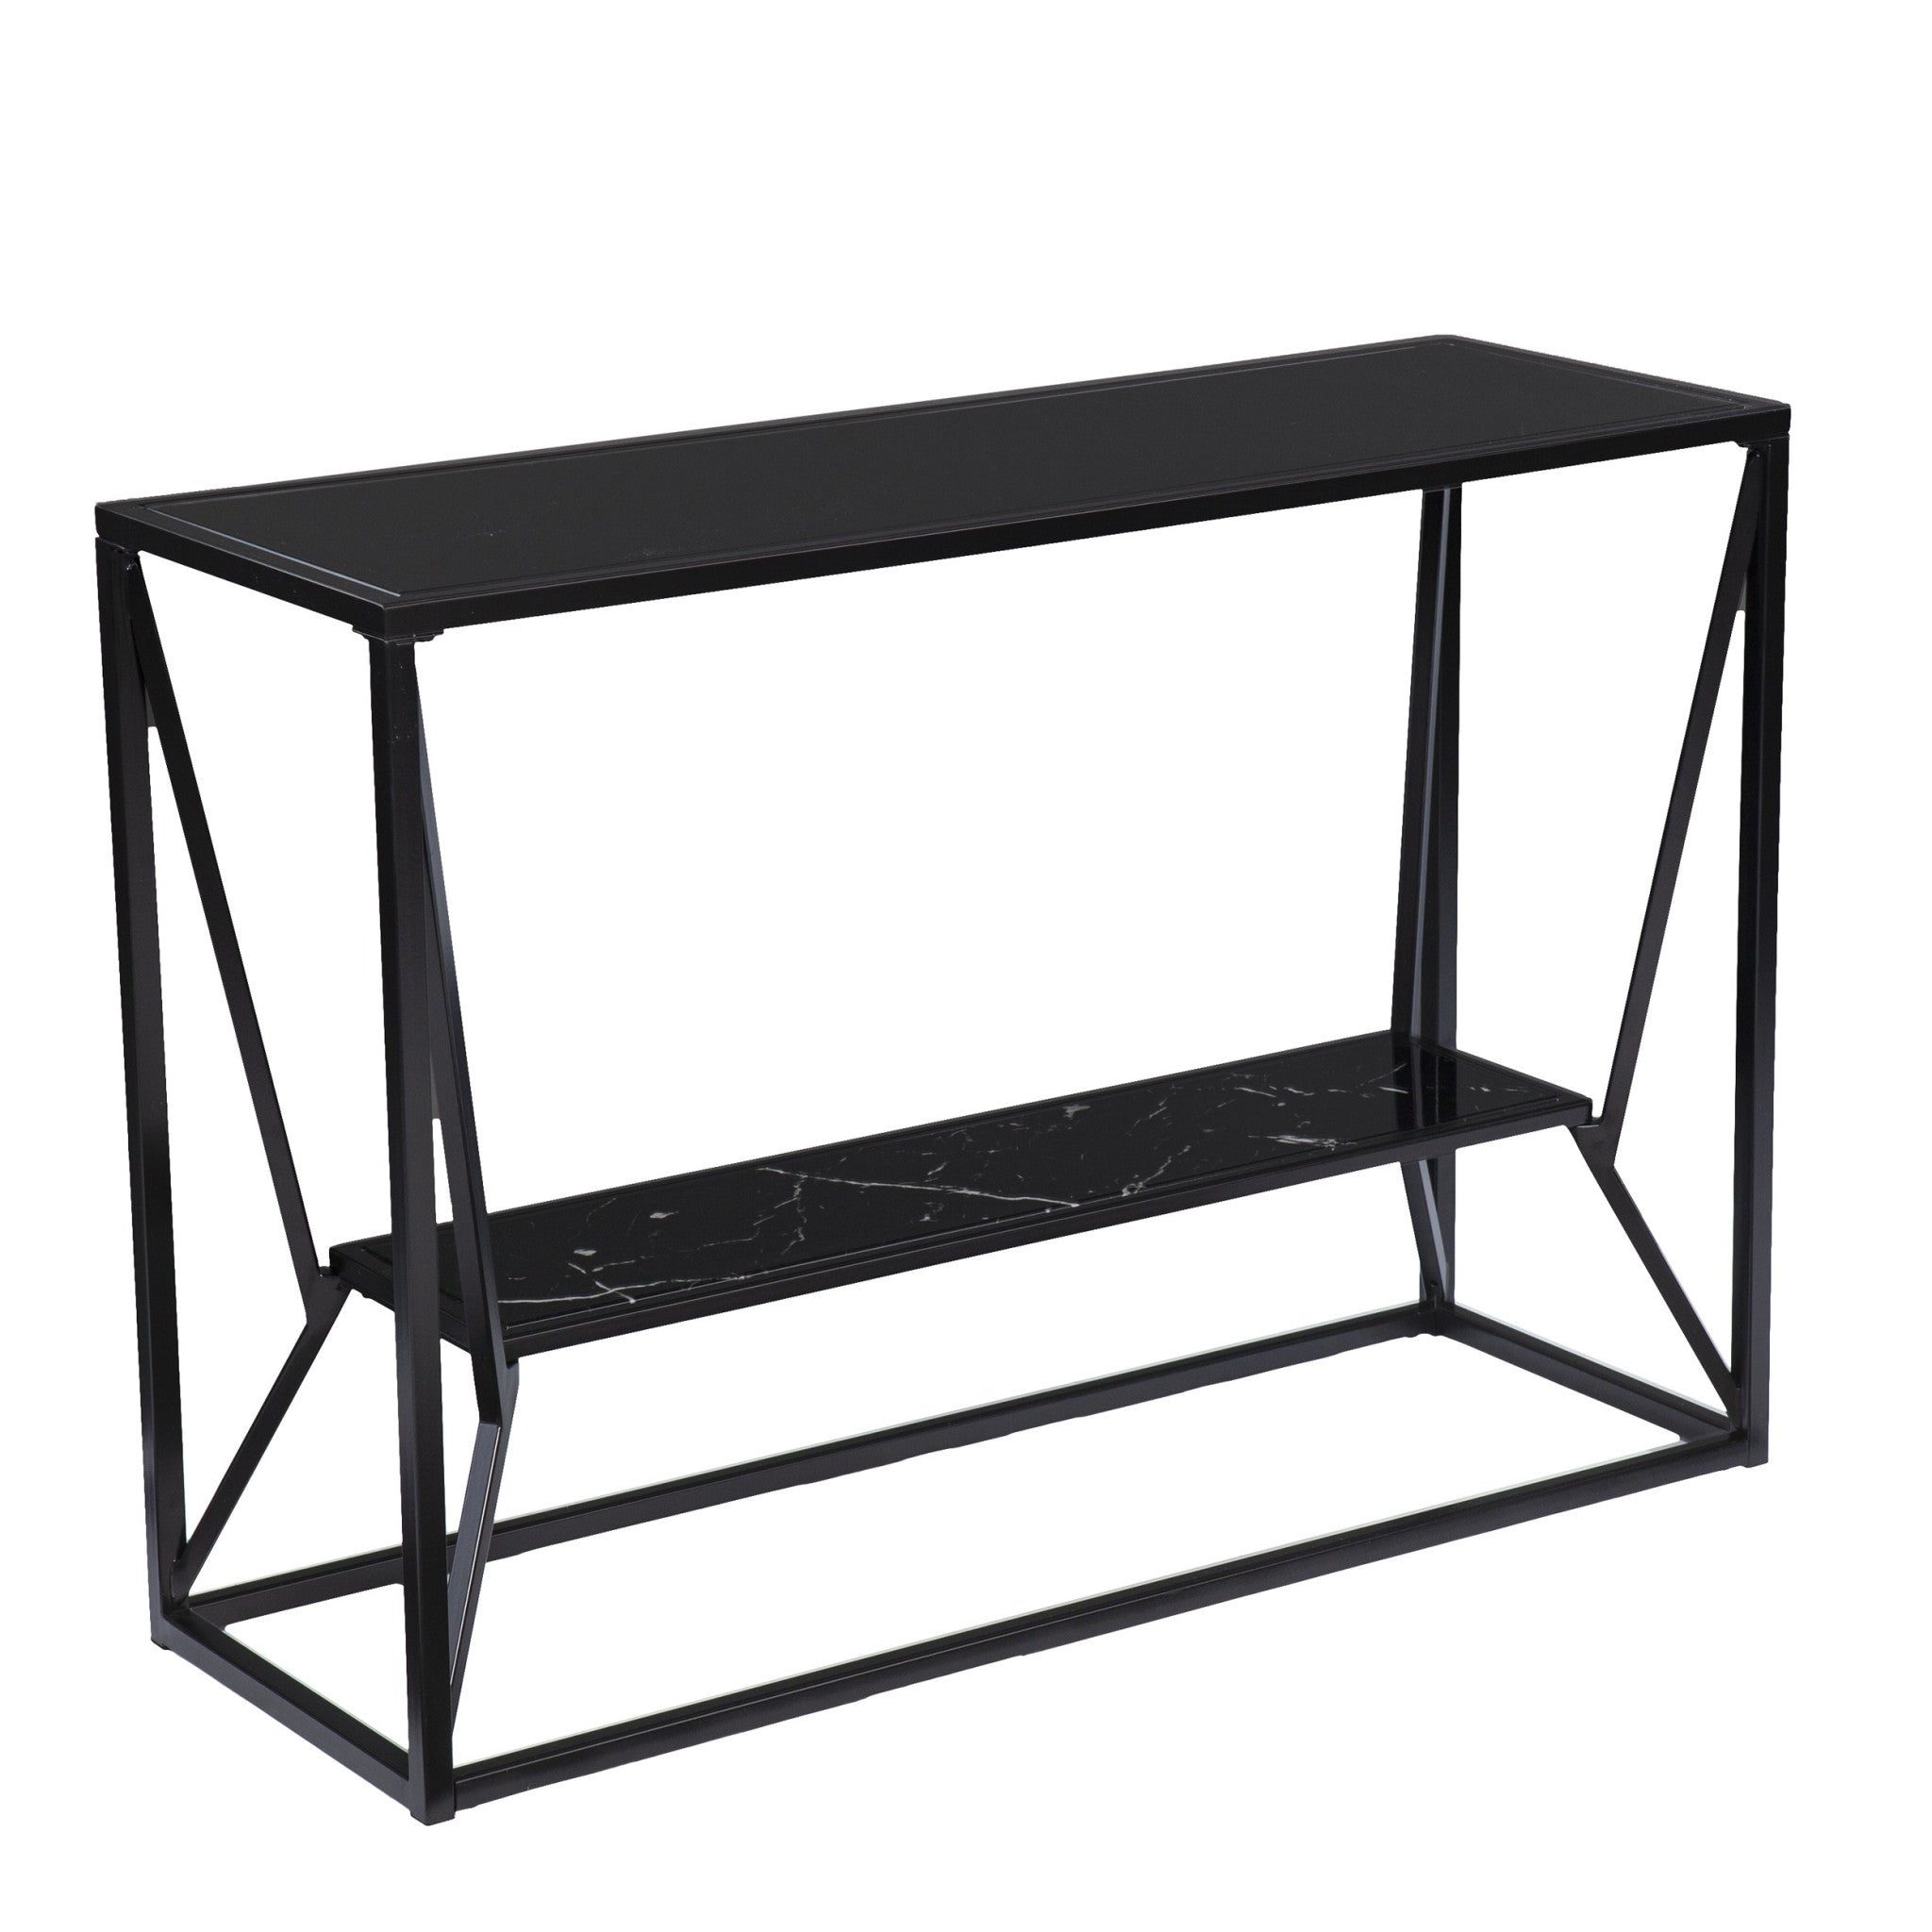 42" Black Glass Frame Console Table With Storage